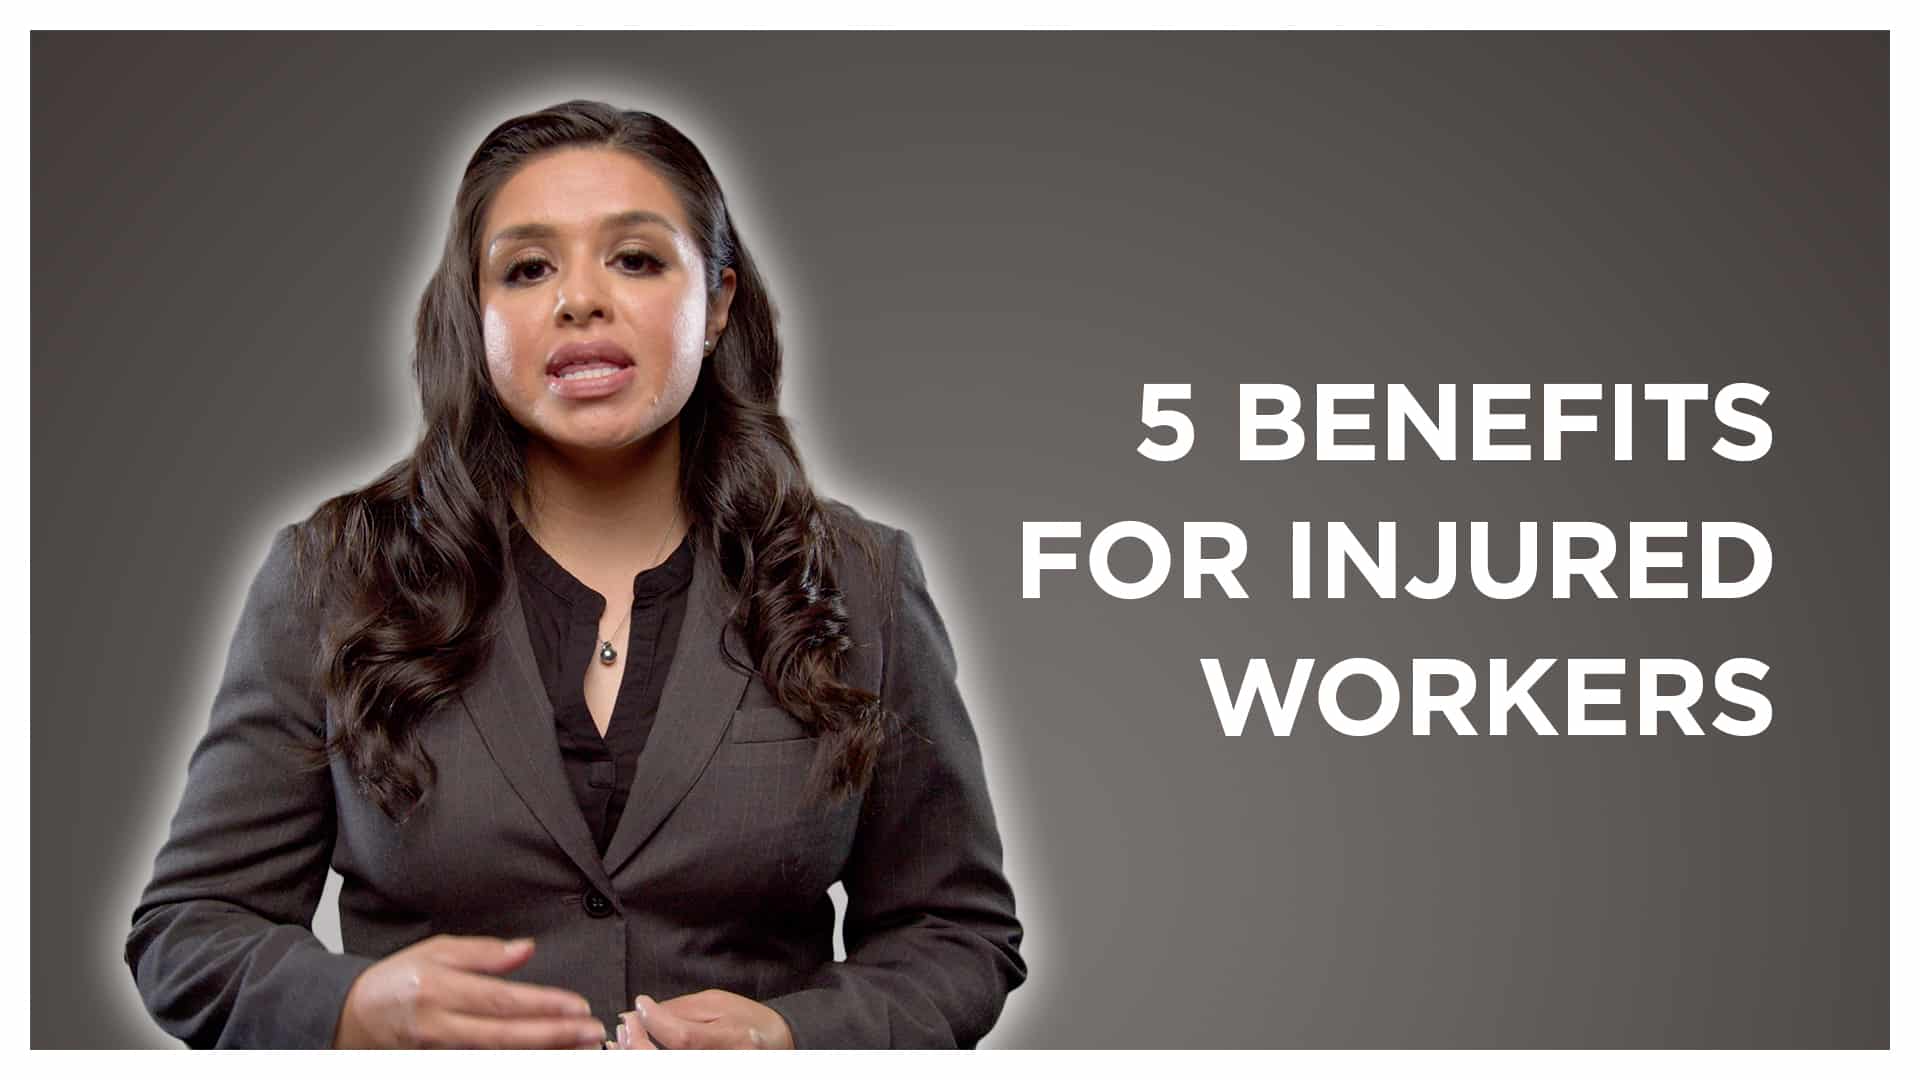 What Benefits Are Available for Injured Or Sick Workers?